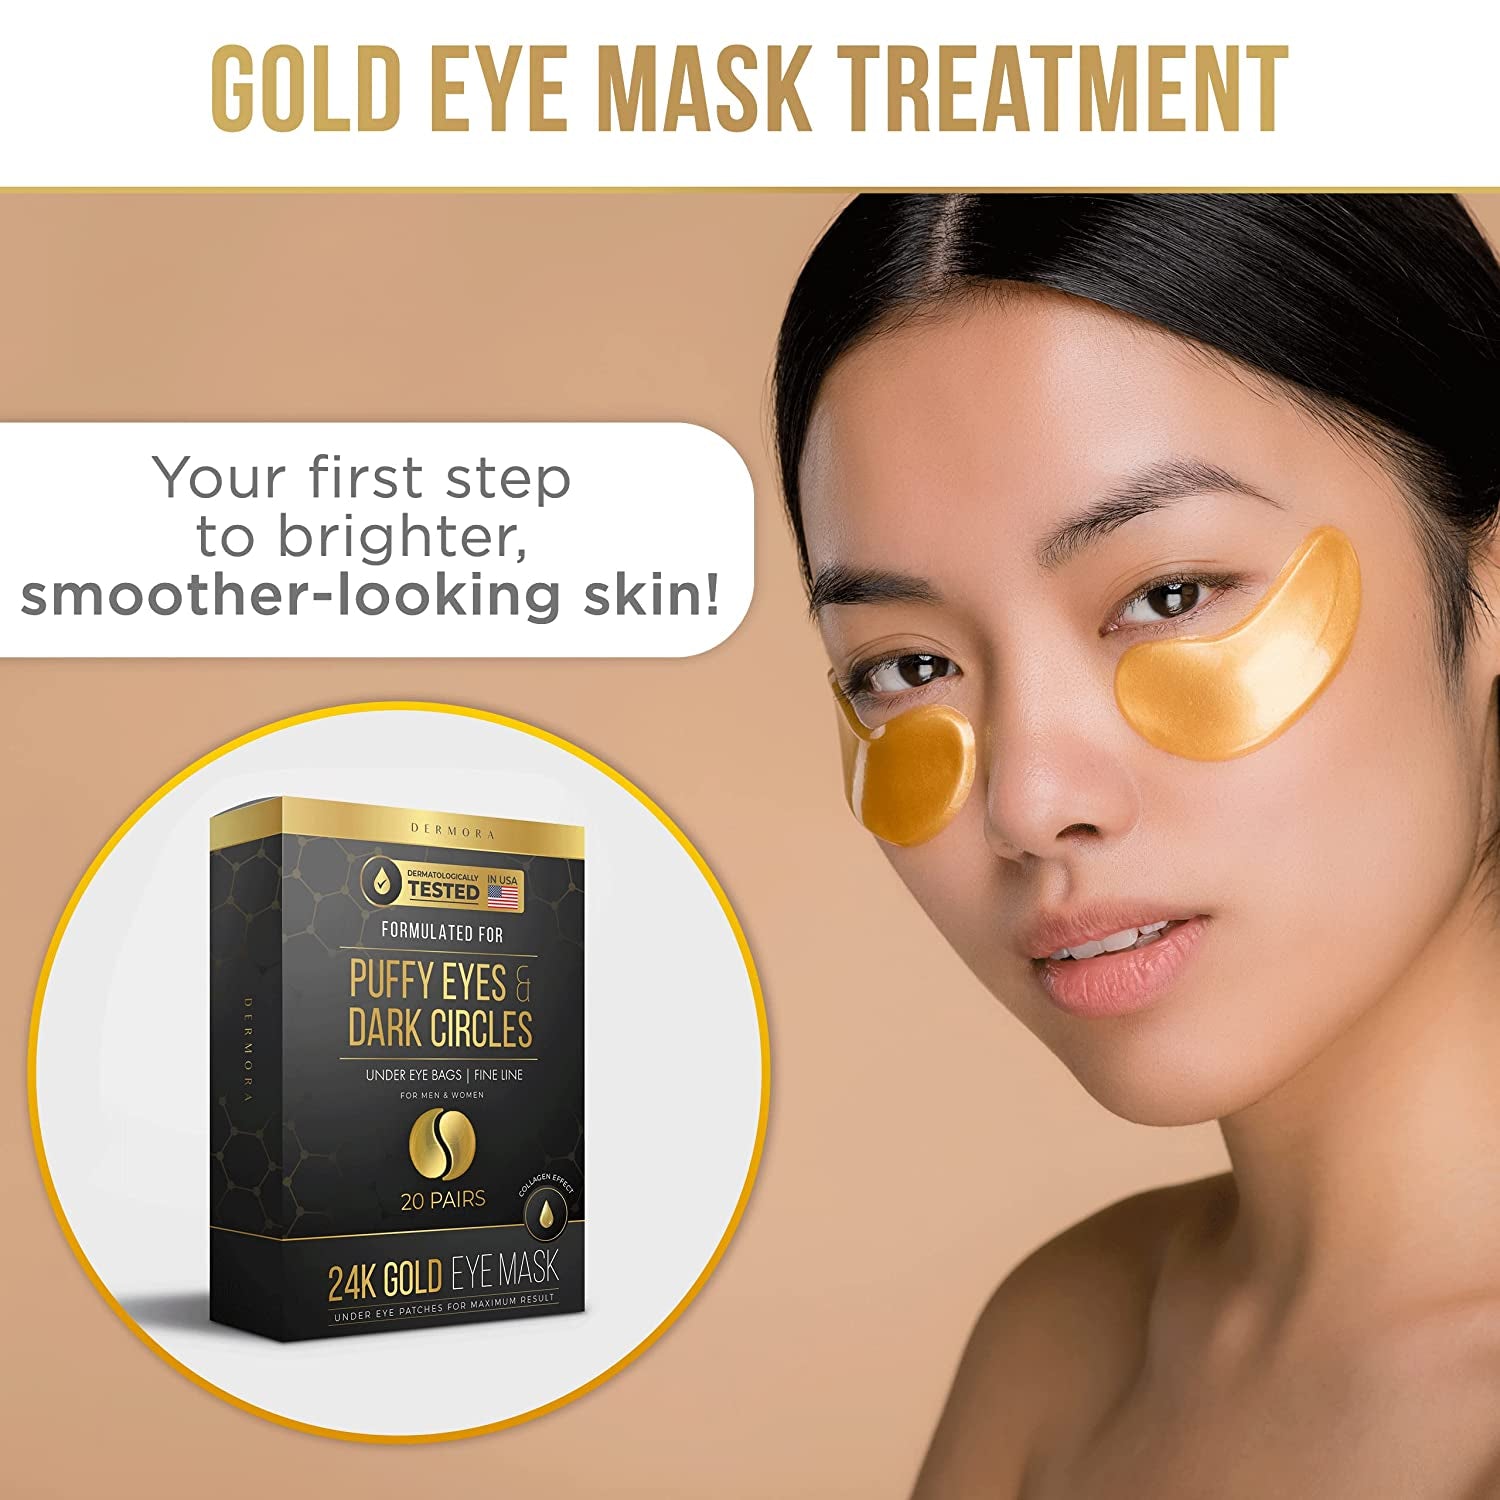 24K Gold Eye Masks - Reduce Puffiness, Dark Circles, Wrinkles, and Fine Lines